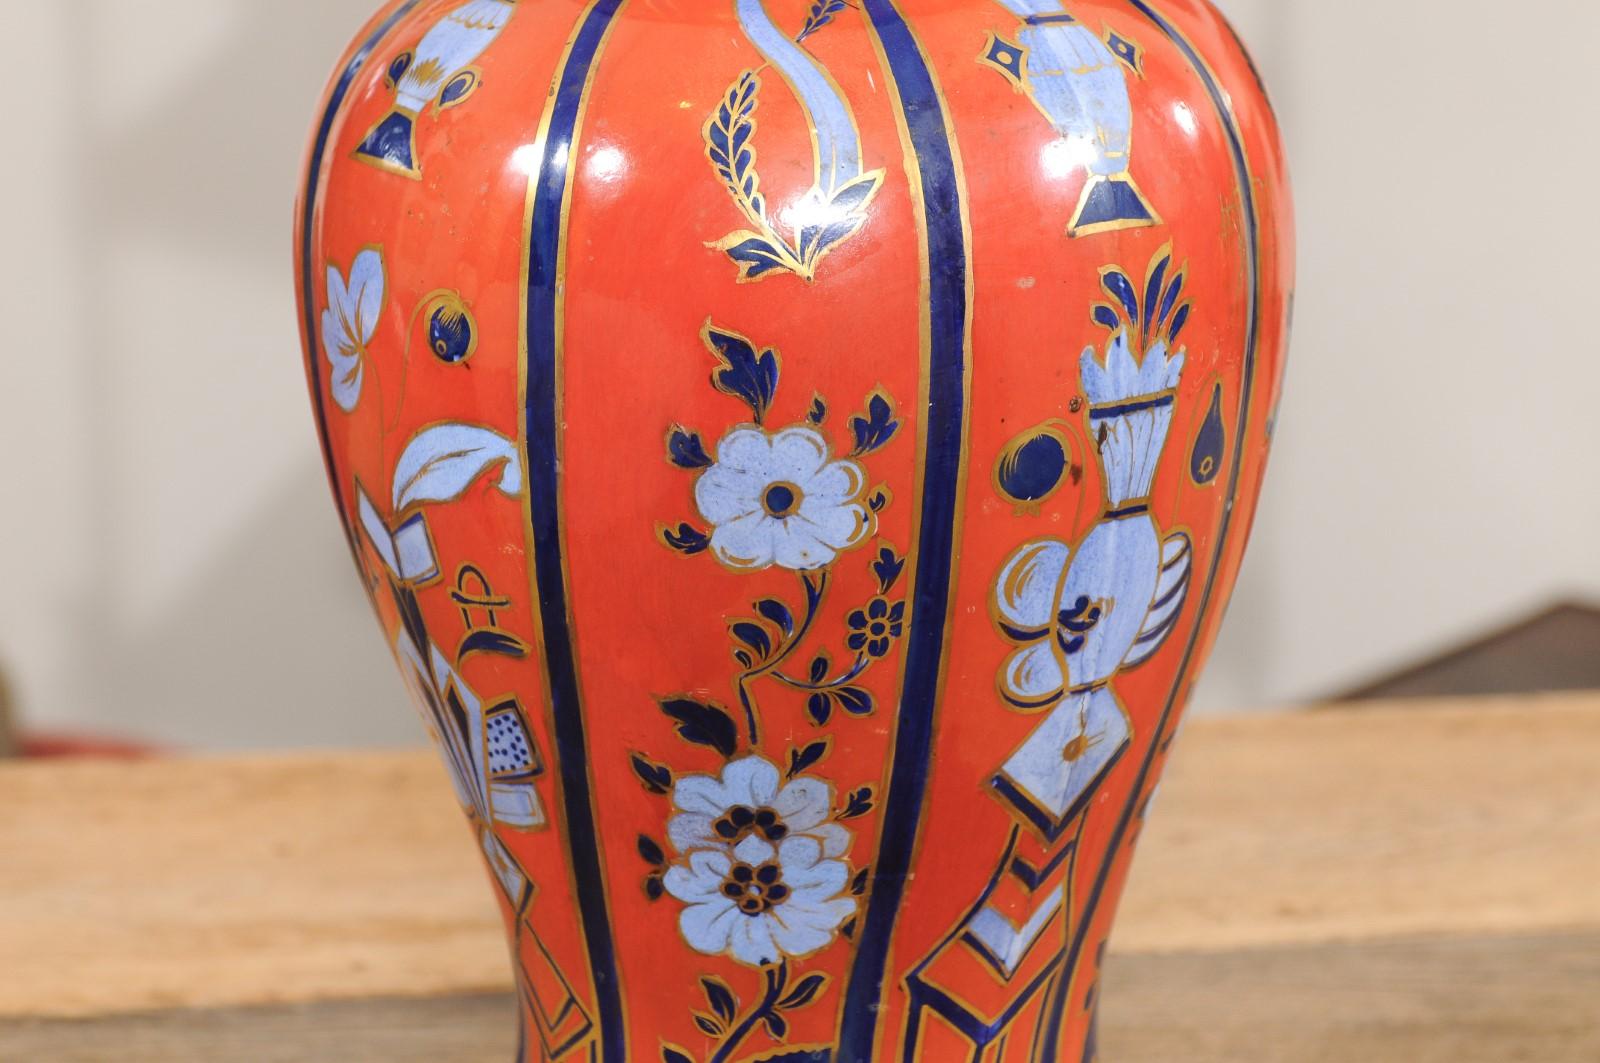 19th Century English Porcelain Vase in Orange & Blue, wired as a Lamp For Sale 4